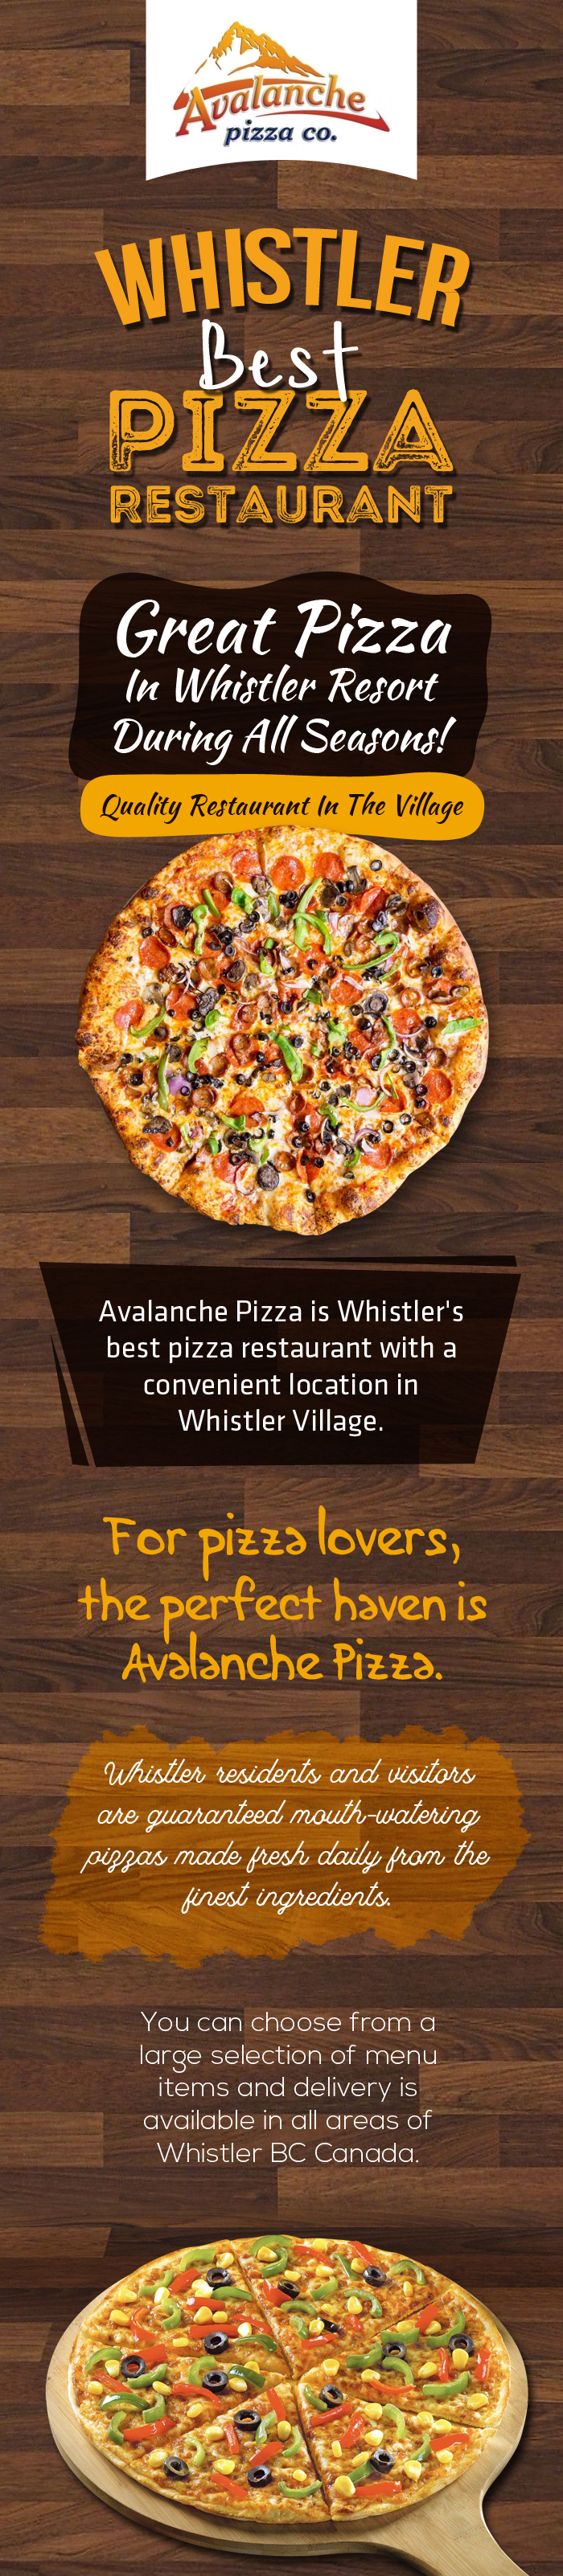 Visit Avalanche Pizza for Great Pizza in Whistler During Any Season